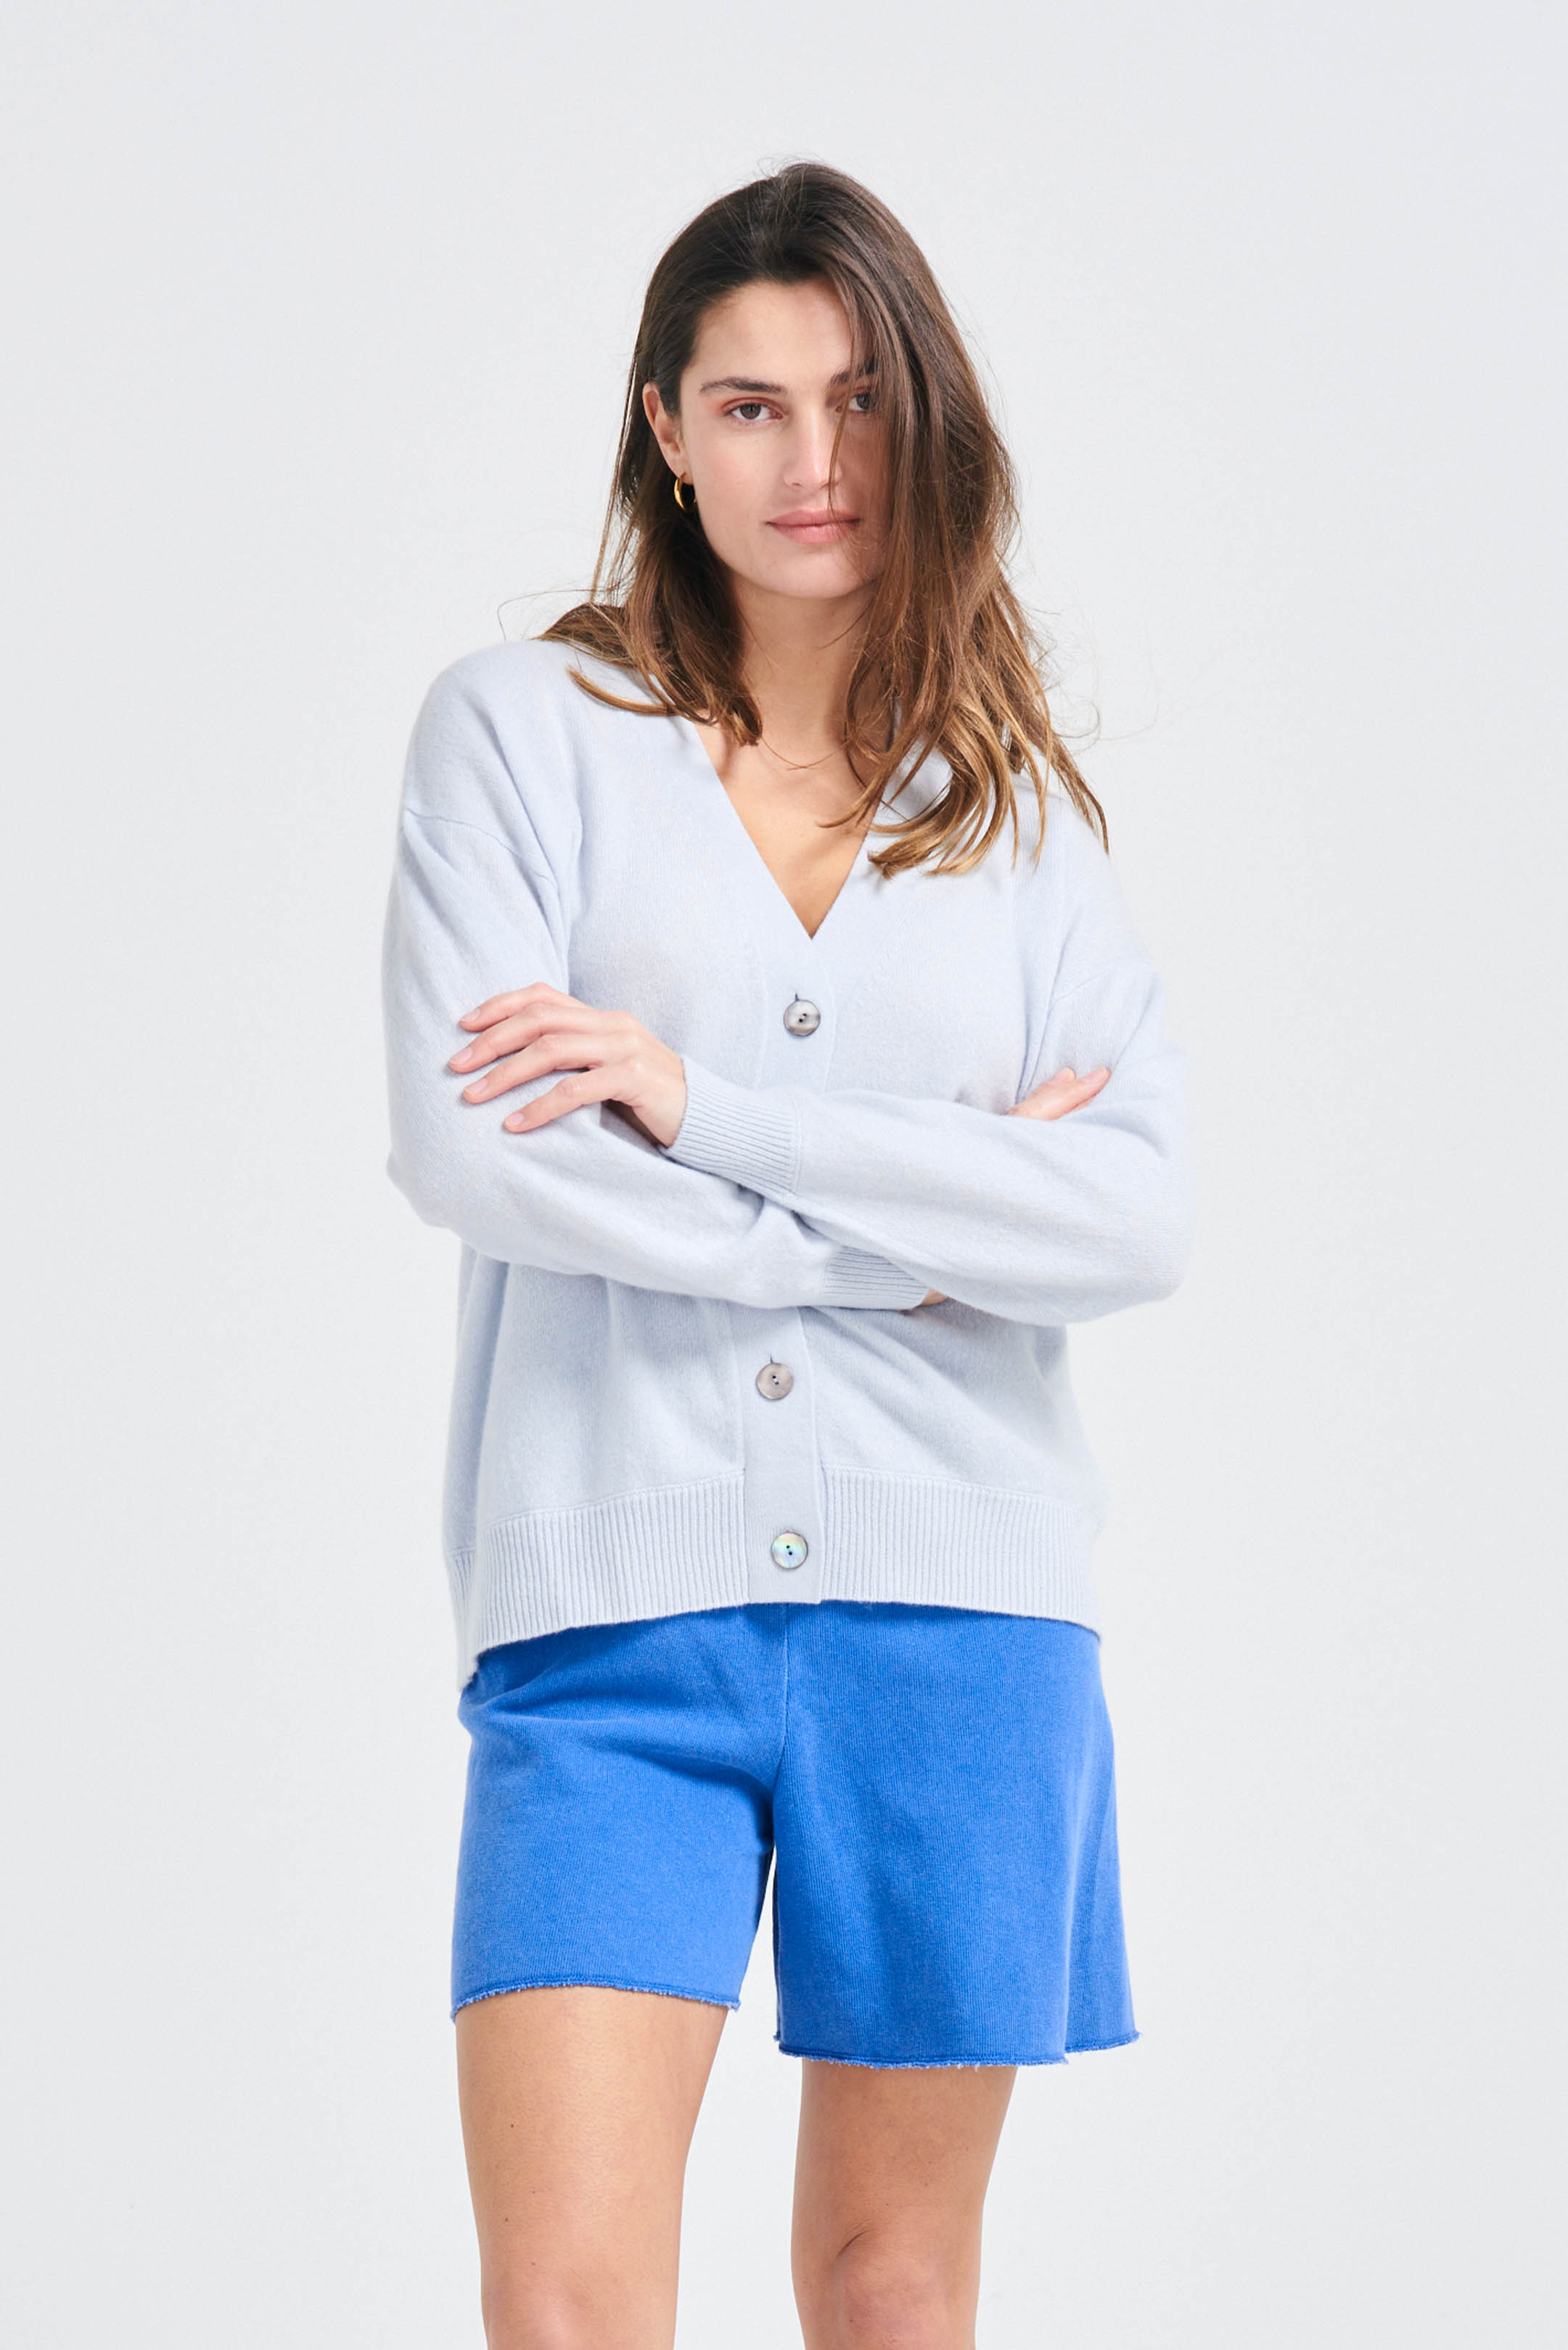 Brown haired female model wearing Jumper1234 Oversize cashmere vee neck cardigan in pale blue